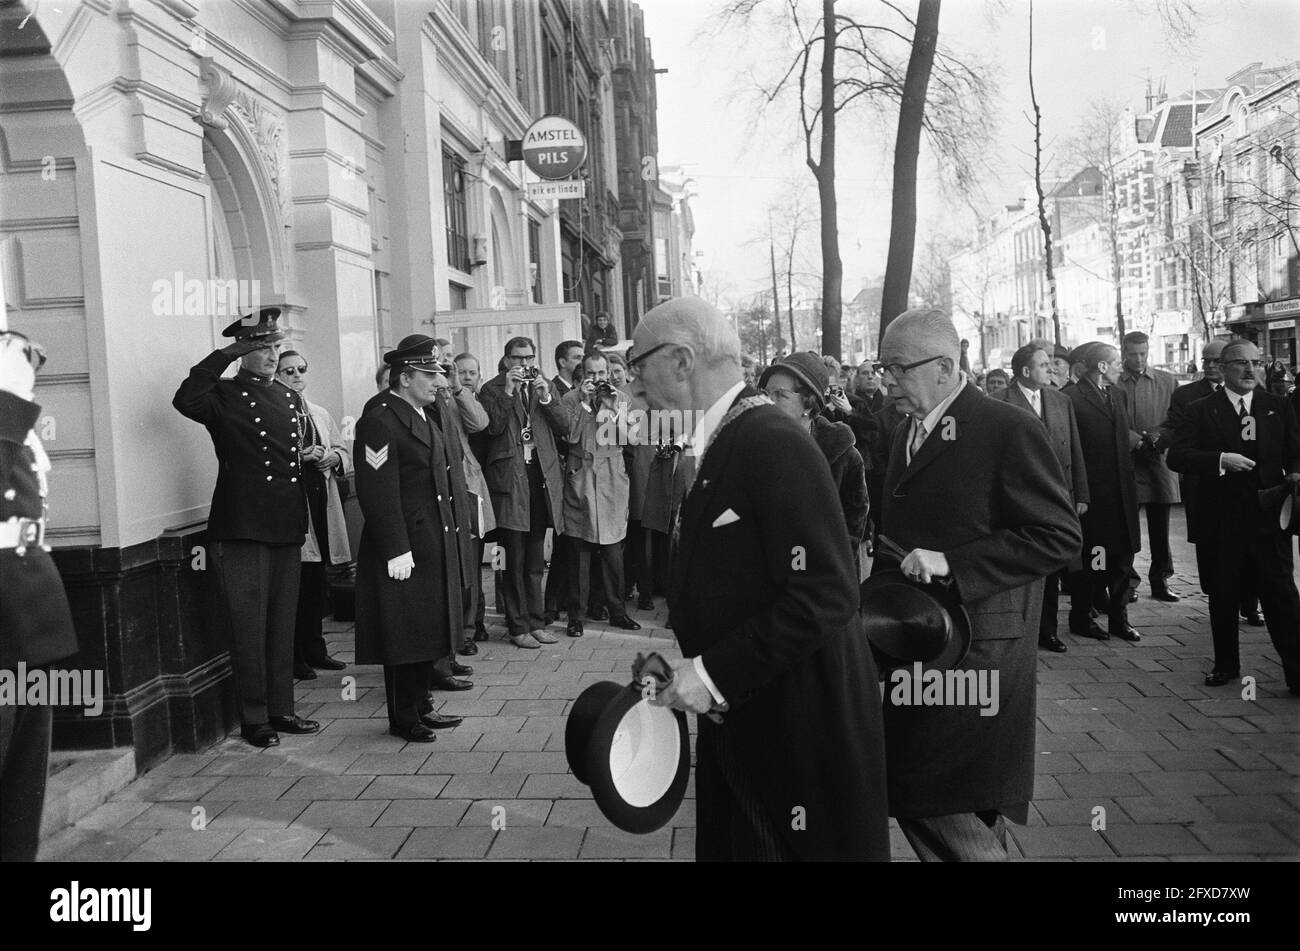 President Heinemann and wife were received by Mayor Samkalden at the official residence Amsterdam, November 24, 1969, EIGHTY-GENOTES, official residences, gifts, receptions, The Netherlands, 20th century press agency photo, news to remember, documentary, historic photography 1945-1990, visual stories, human history of the Twentieth Century, capturing moments in time Stock Photo